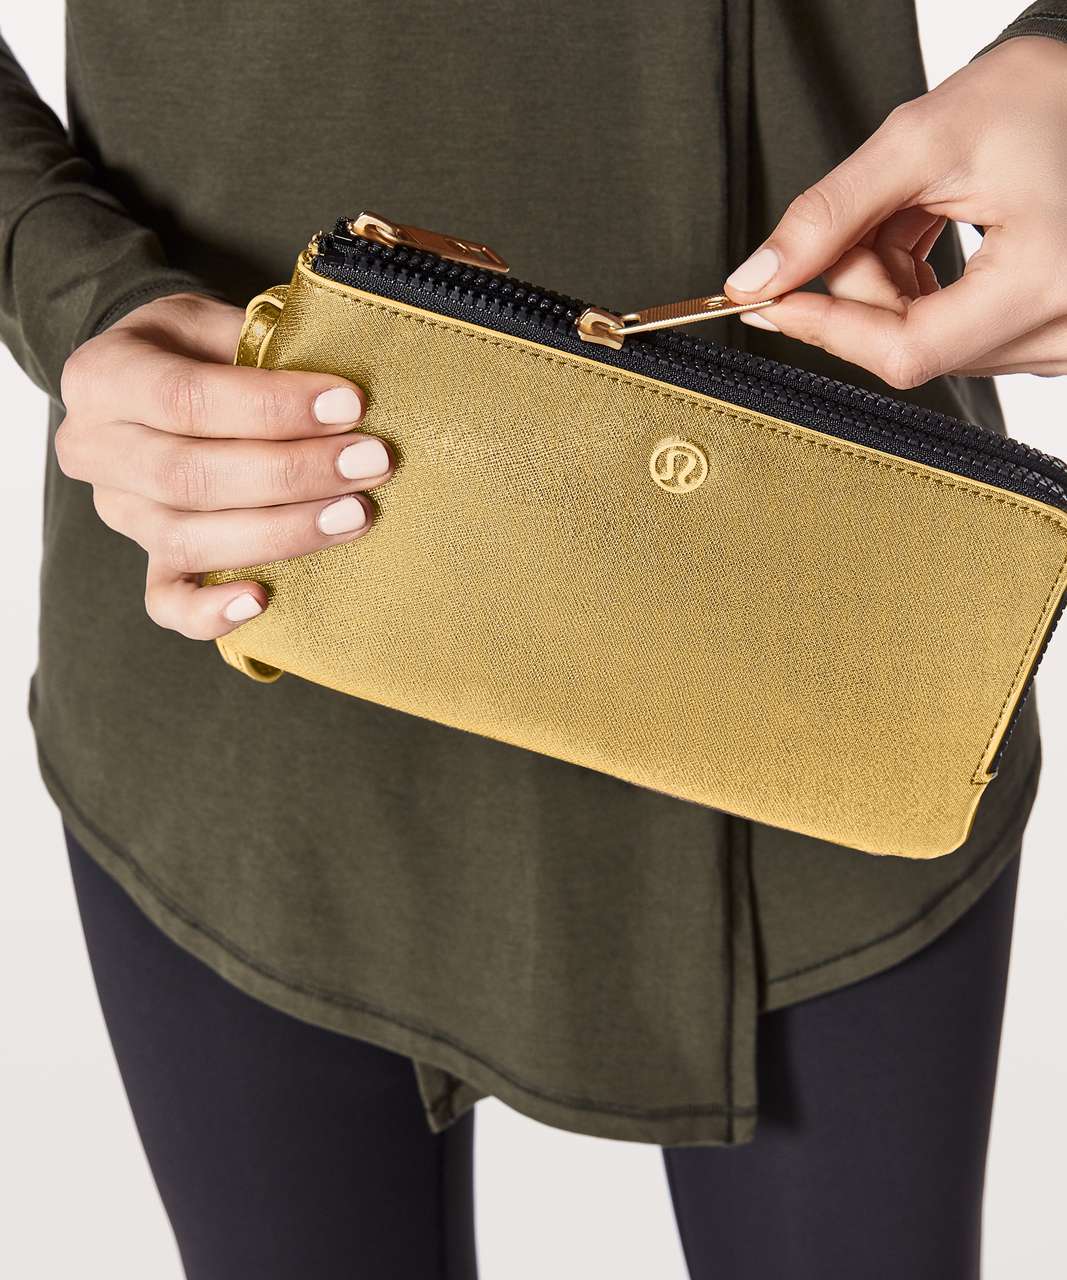 Lululemon Double Up Pouch - Gold